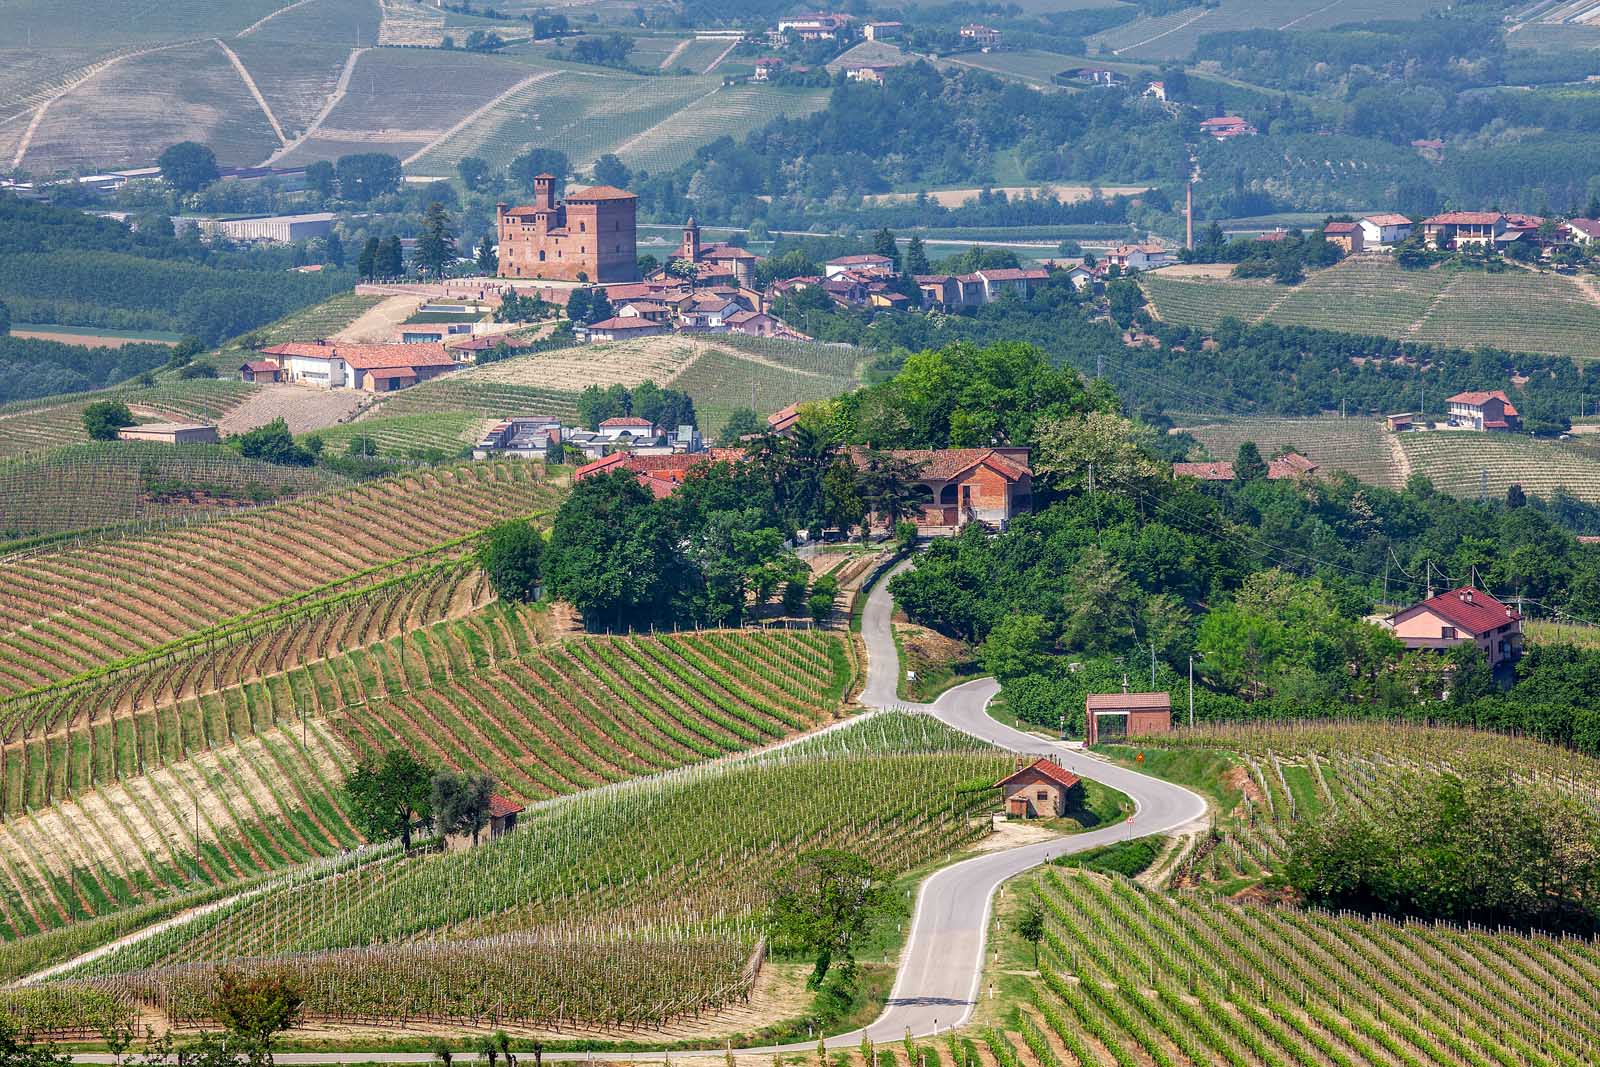 Why should you visit Piedmont Italy